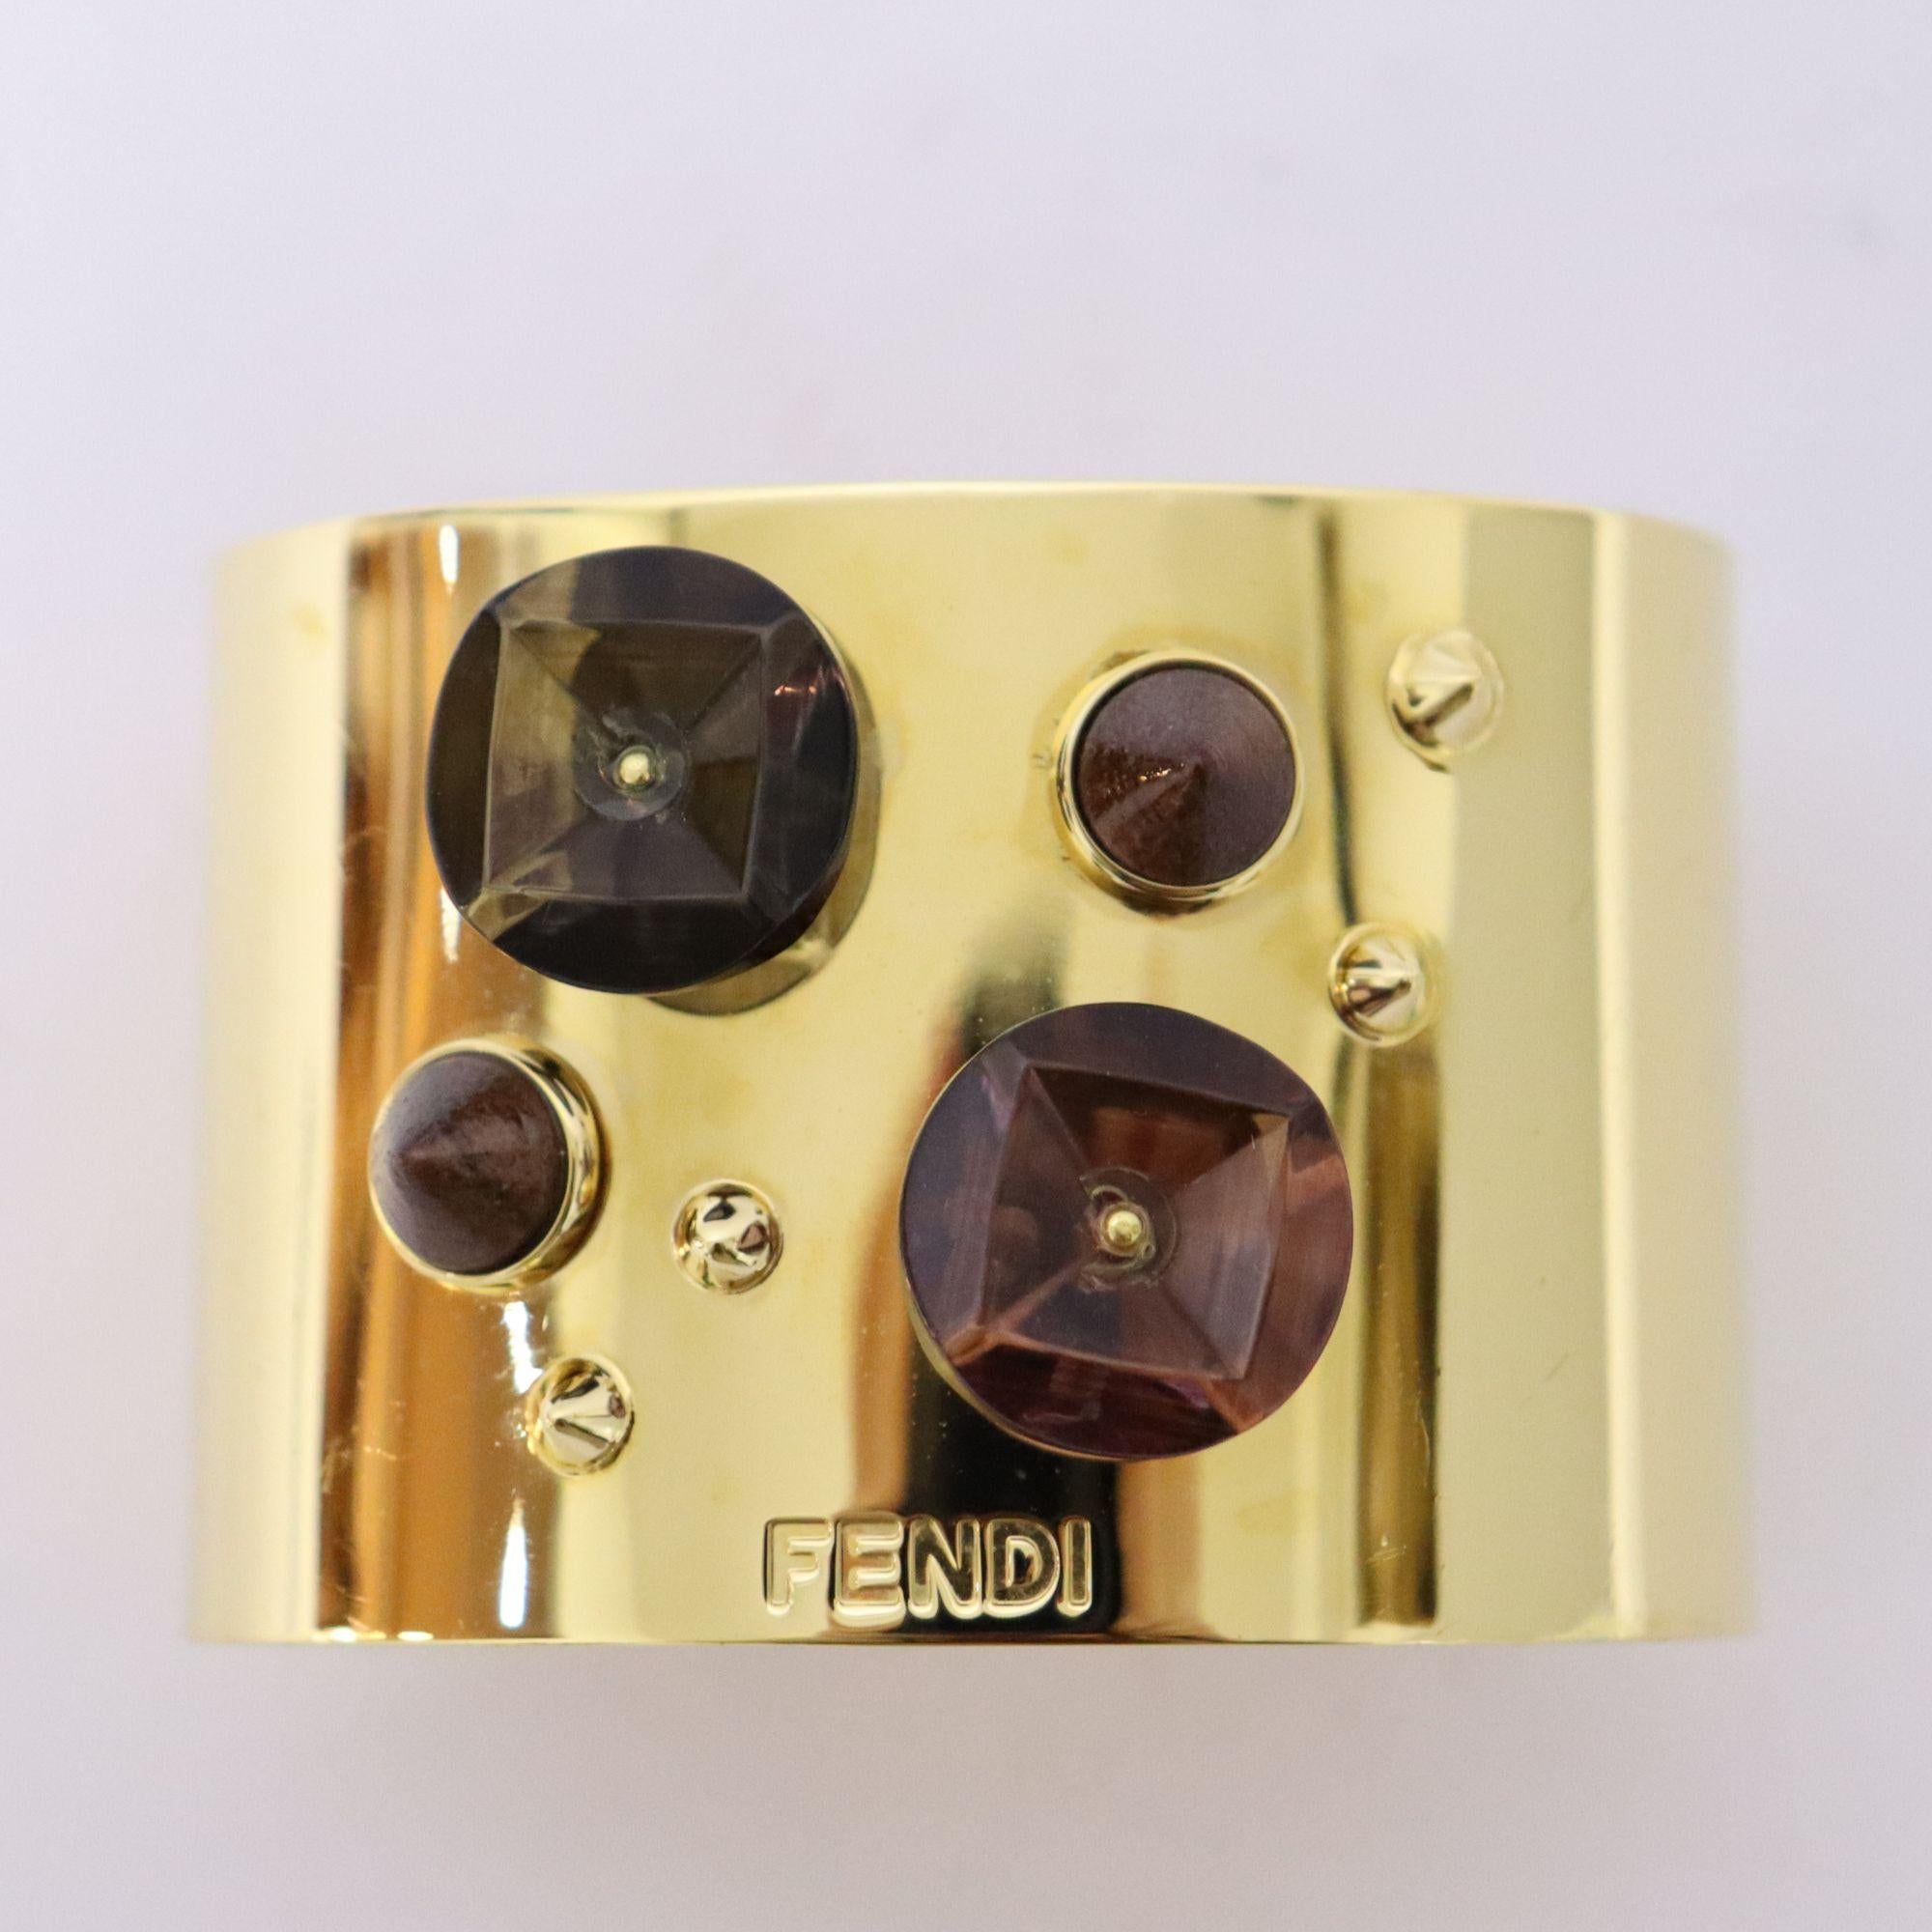 Fendi multicolored gemstone embellished with studs wide cuff bracelet. FENDI logo imprinted on the bottom.

Measurements: (Approx.)
Height: 5.5cm
Length: 17cm
Overall Condition: Scratches.
